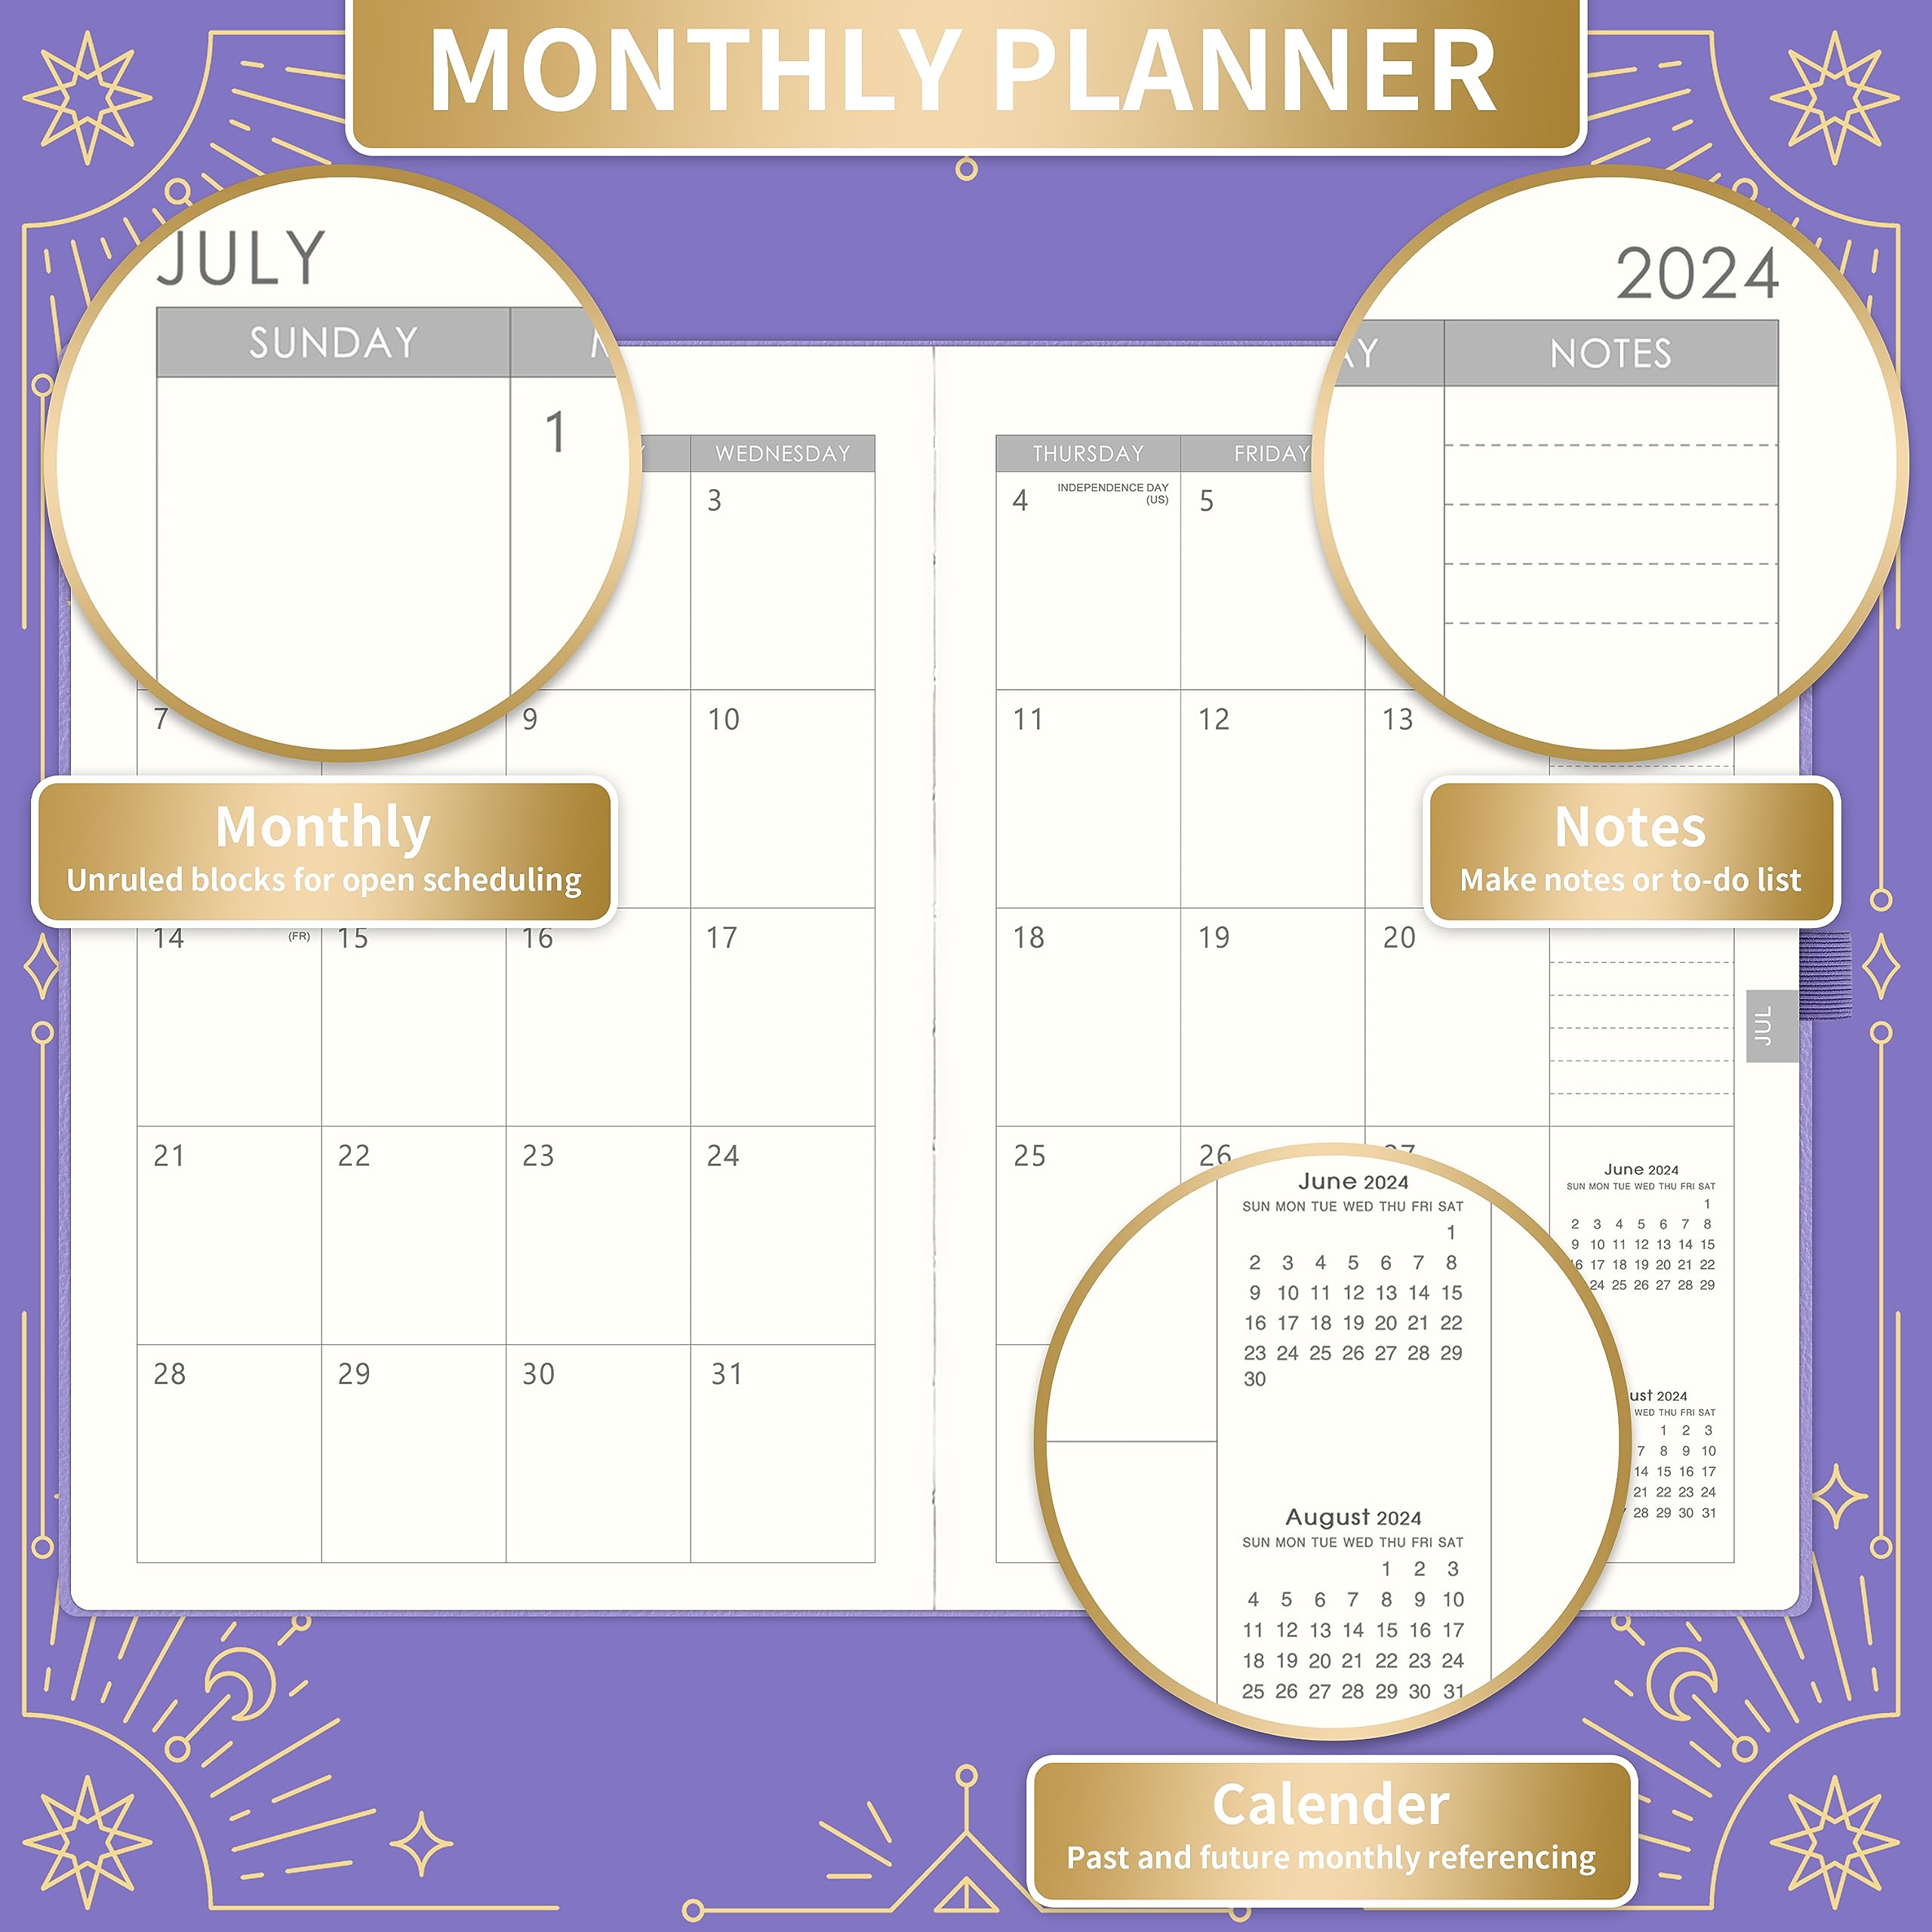 2024 Planner - 2024 Weekly Monthly Planner, Janaury 2024 - December 2024, 5.75" x 8.25", Faux Leather Planner 2024 with Back Pocket & 40 Notes Pages - Medium Purple